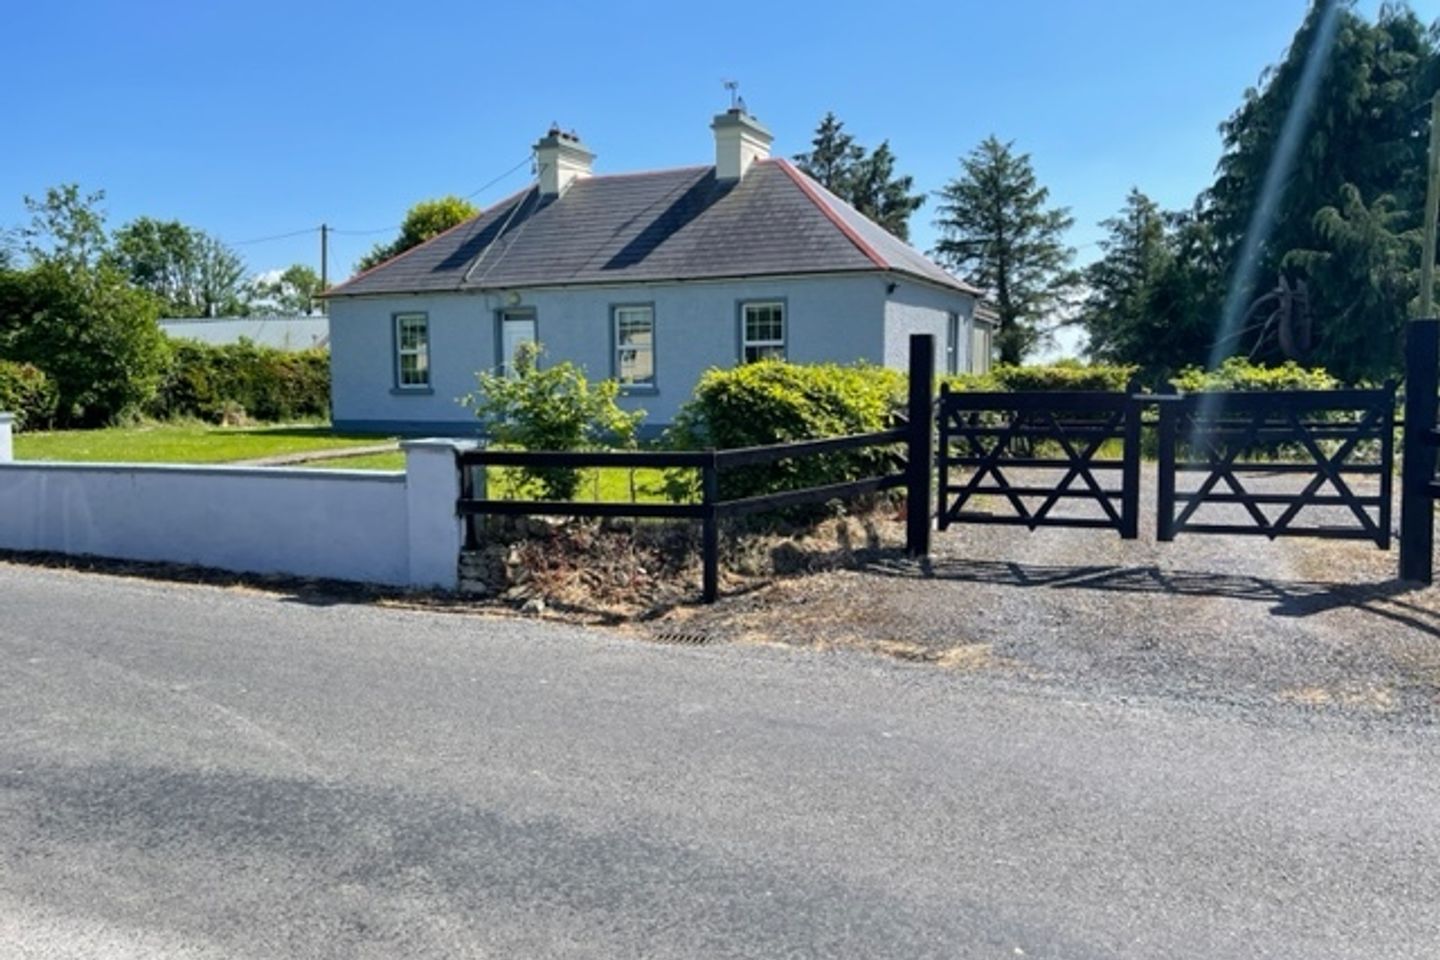 The Bungalow, Ardass, Castlerea, Co. Roscommon, F45R663